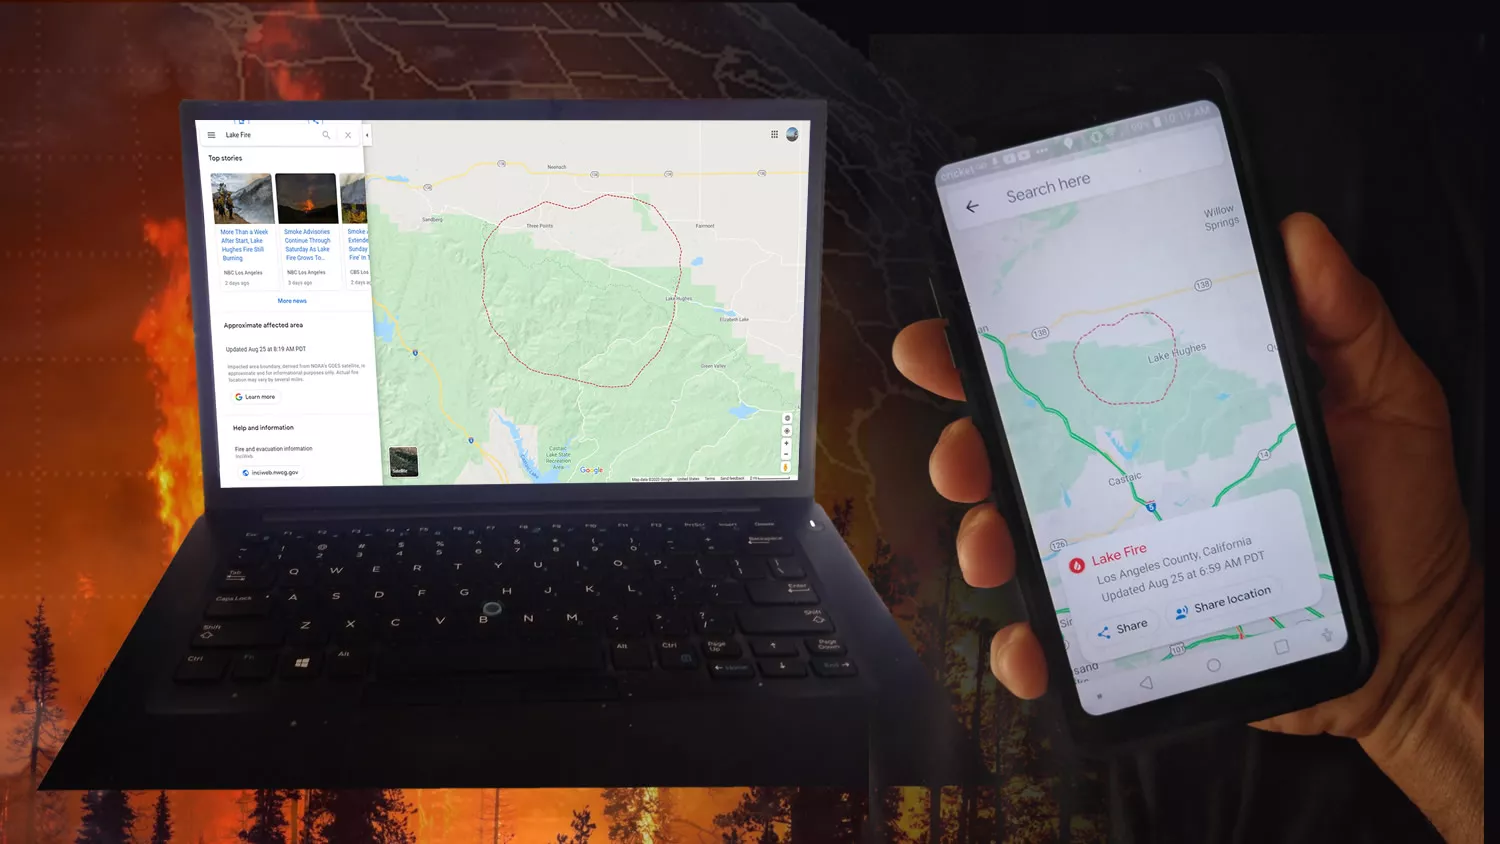  A laptop computer and smartphone with the Google fire maps feature displayed, against a backdrop of a wildfire.